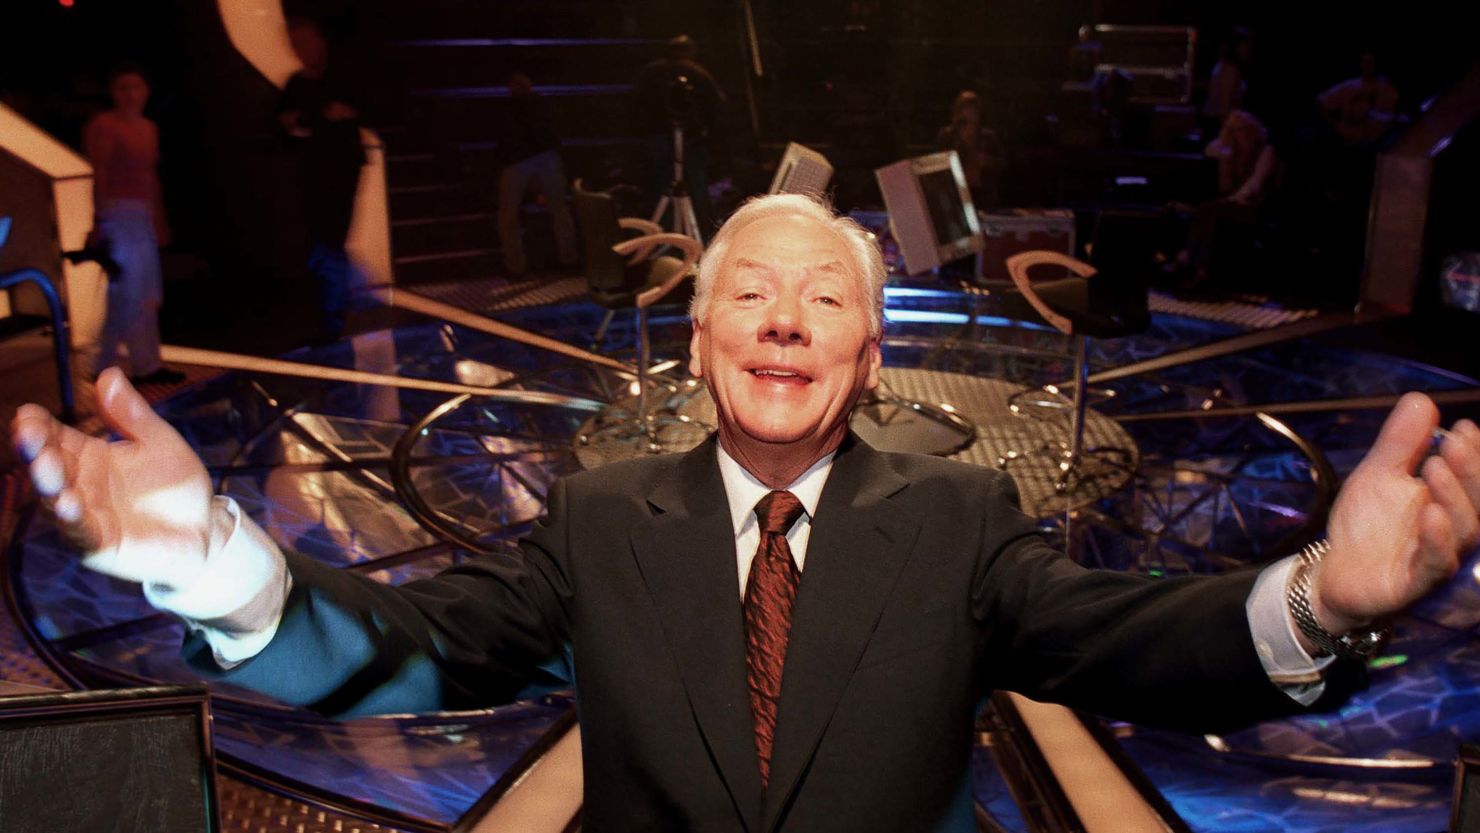 Irish broadcaster Gay Byrne on the set of "Who Wants To Be A Millionaire?" in Dublin. 